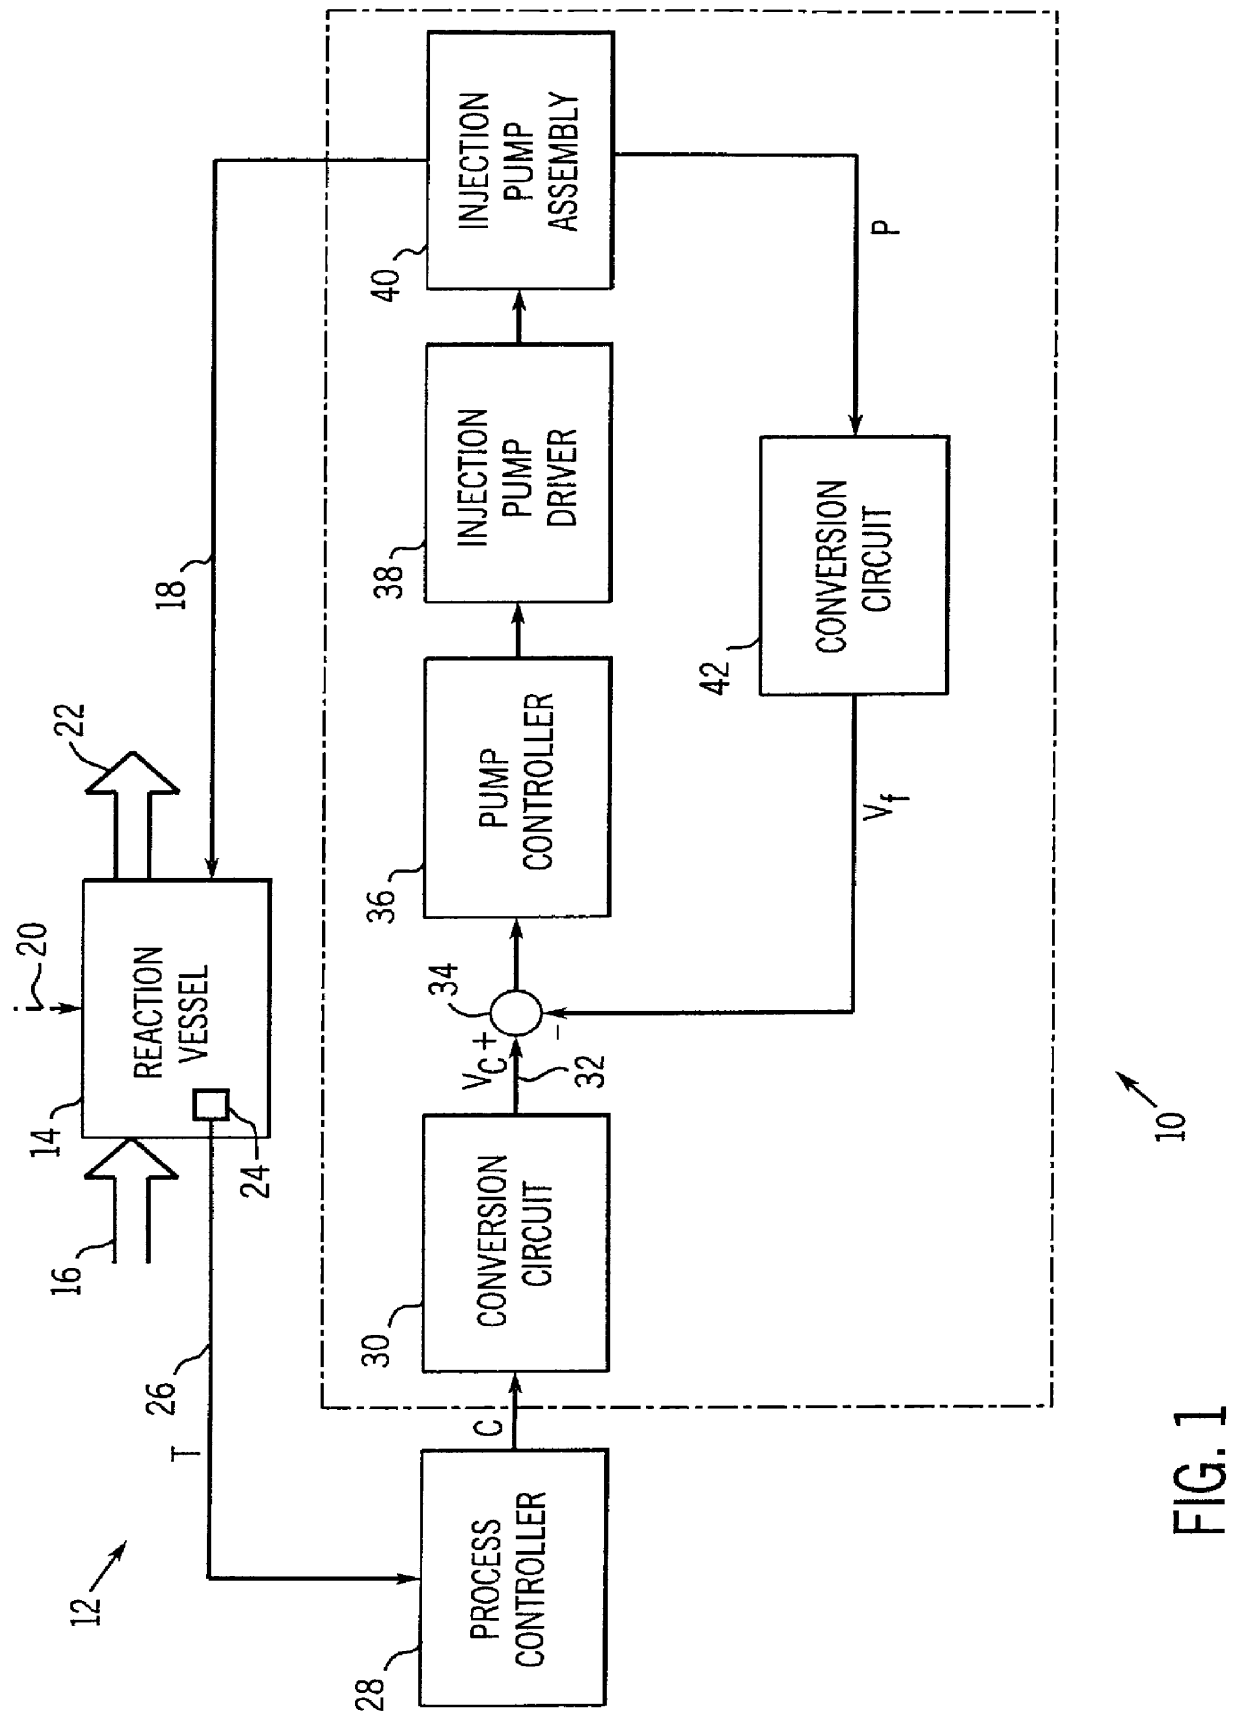 Method and apparatus for metering injection pump flow